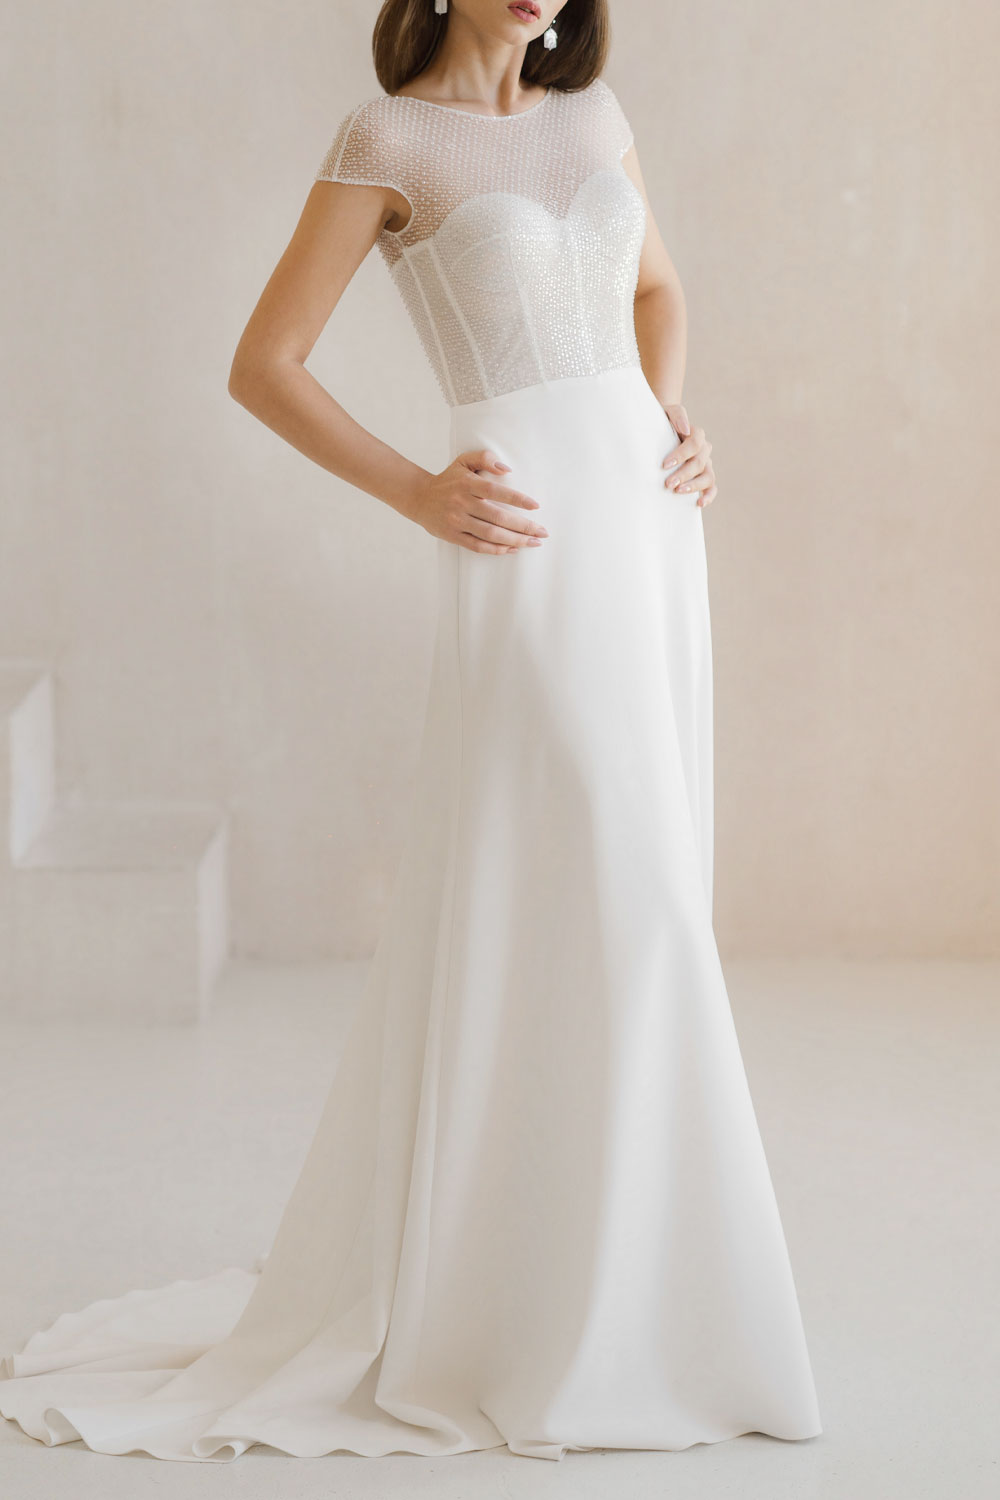 Simple Wedding Dress with Long Back